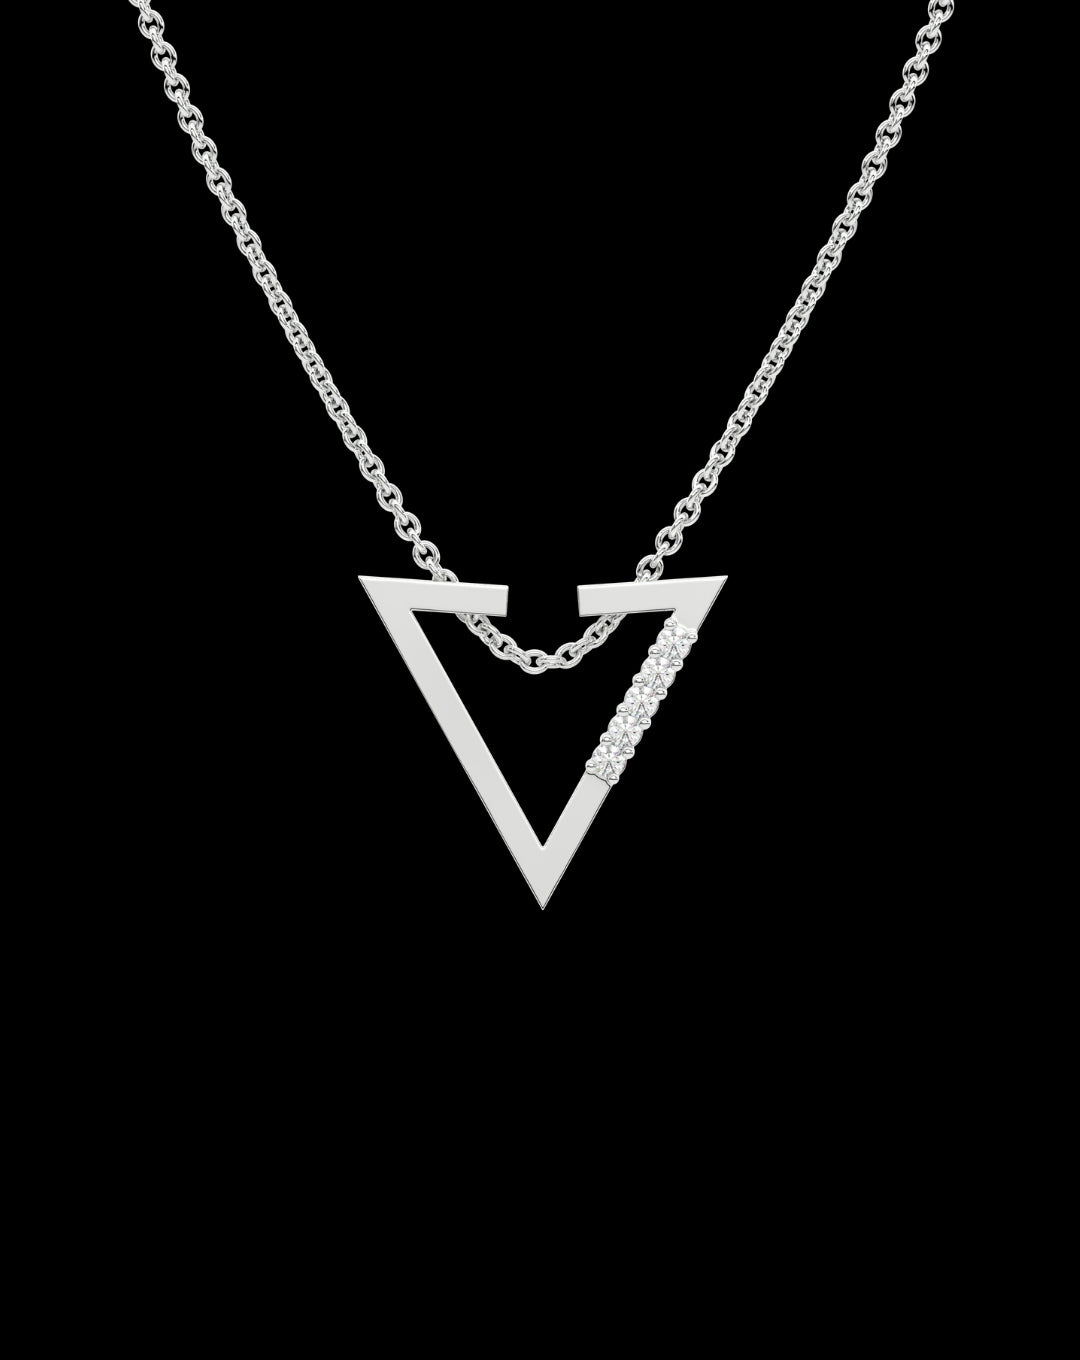 Triangle Chevron Necklace 925 Sterling Silver White Gold Plated